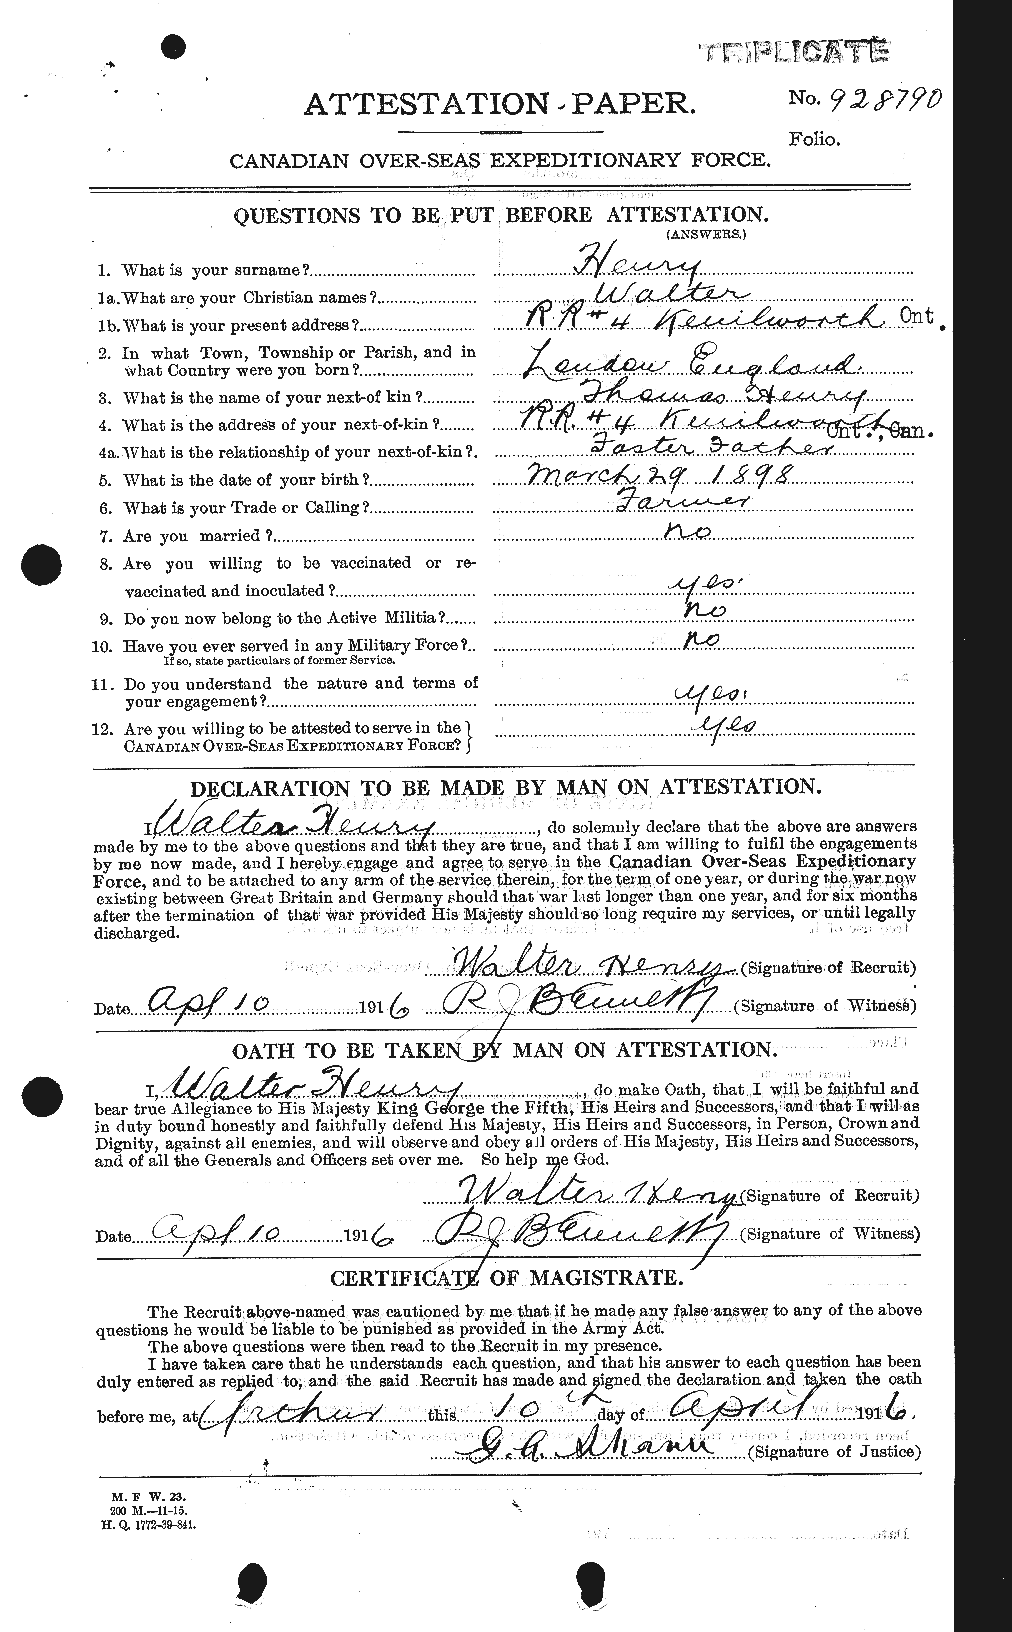 Personnel Records of the First World War - CEF 387750a